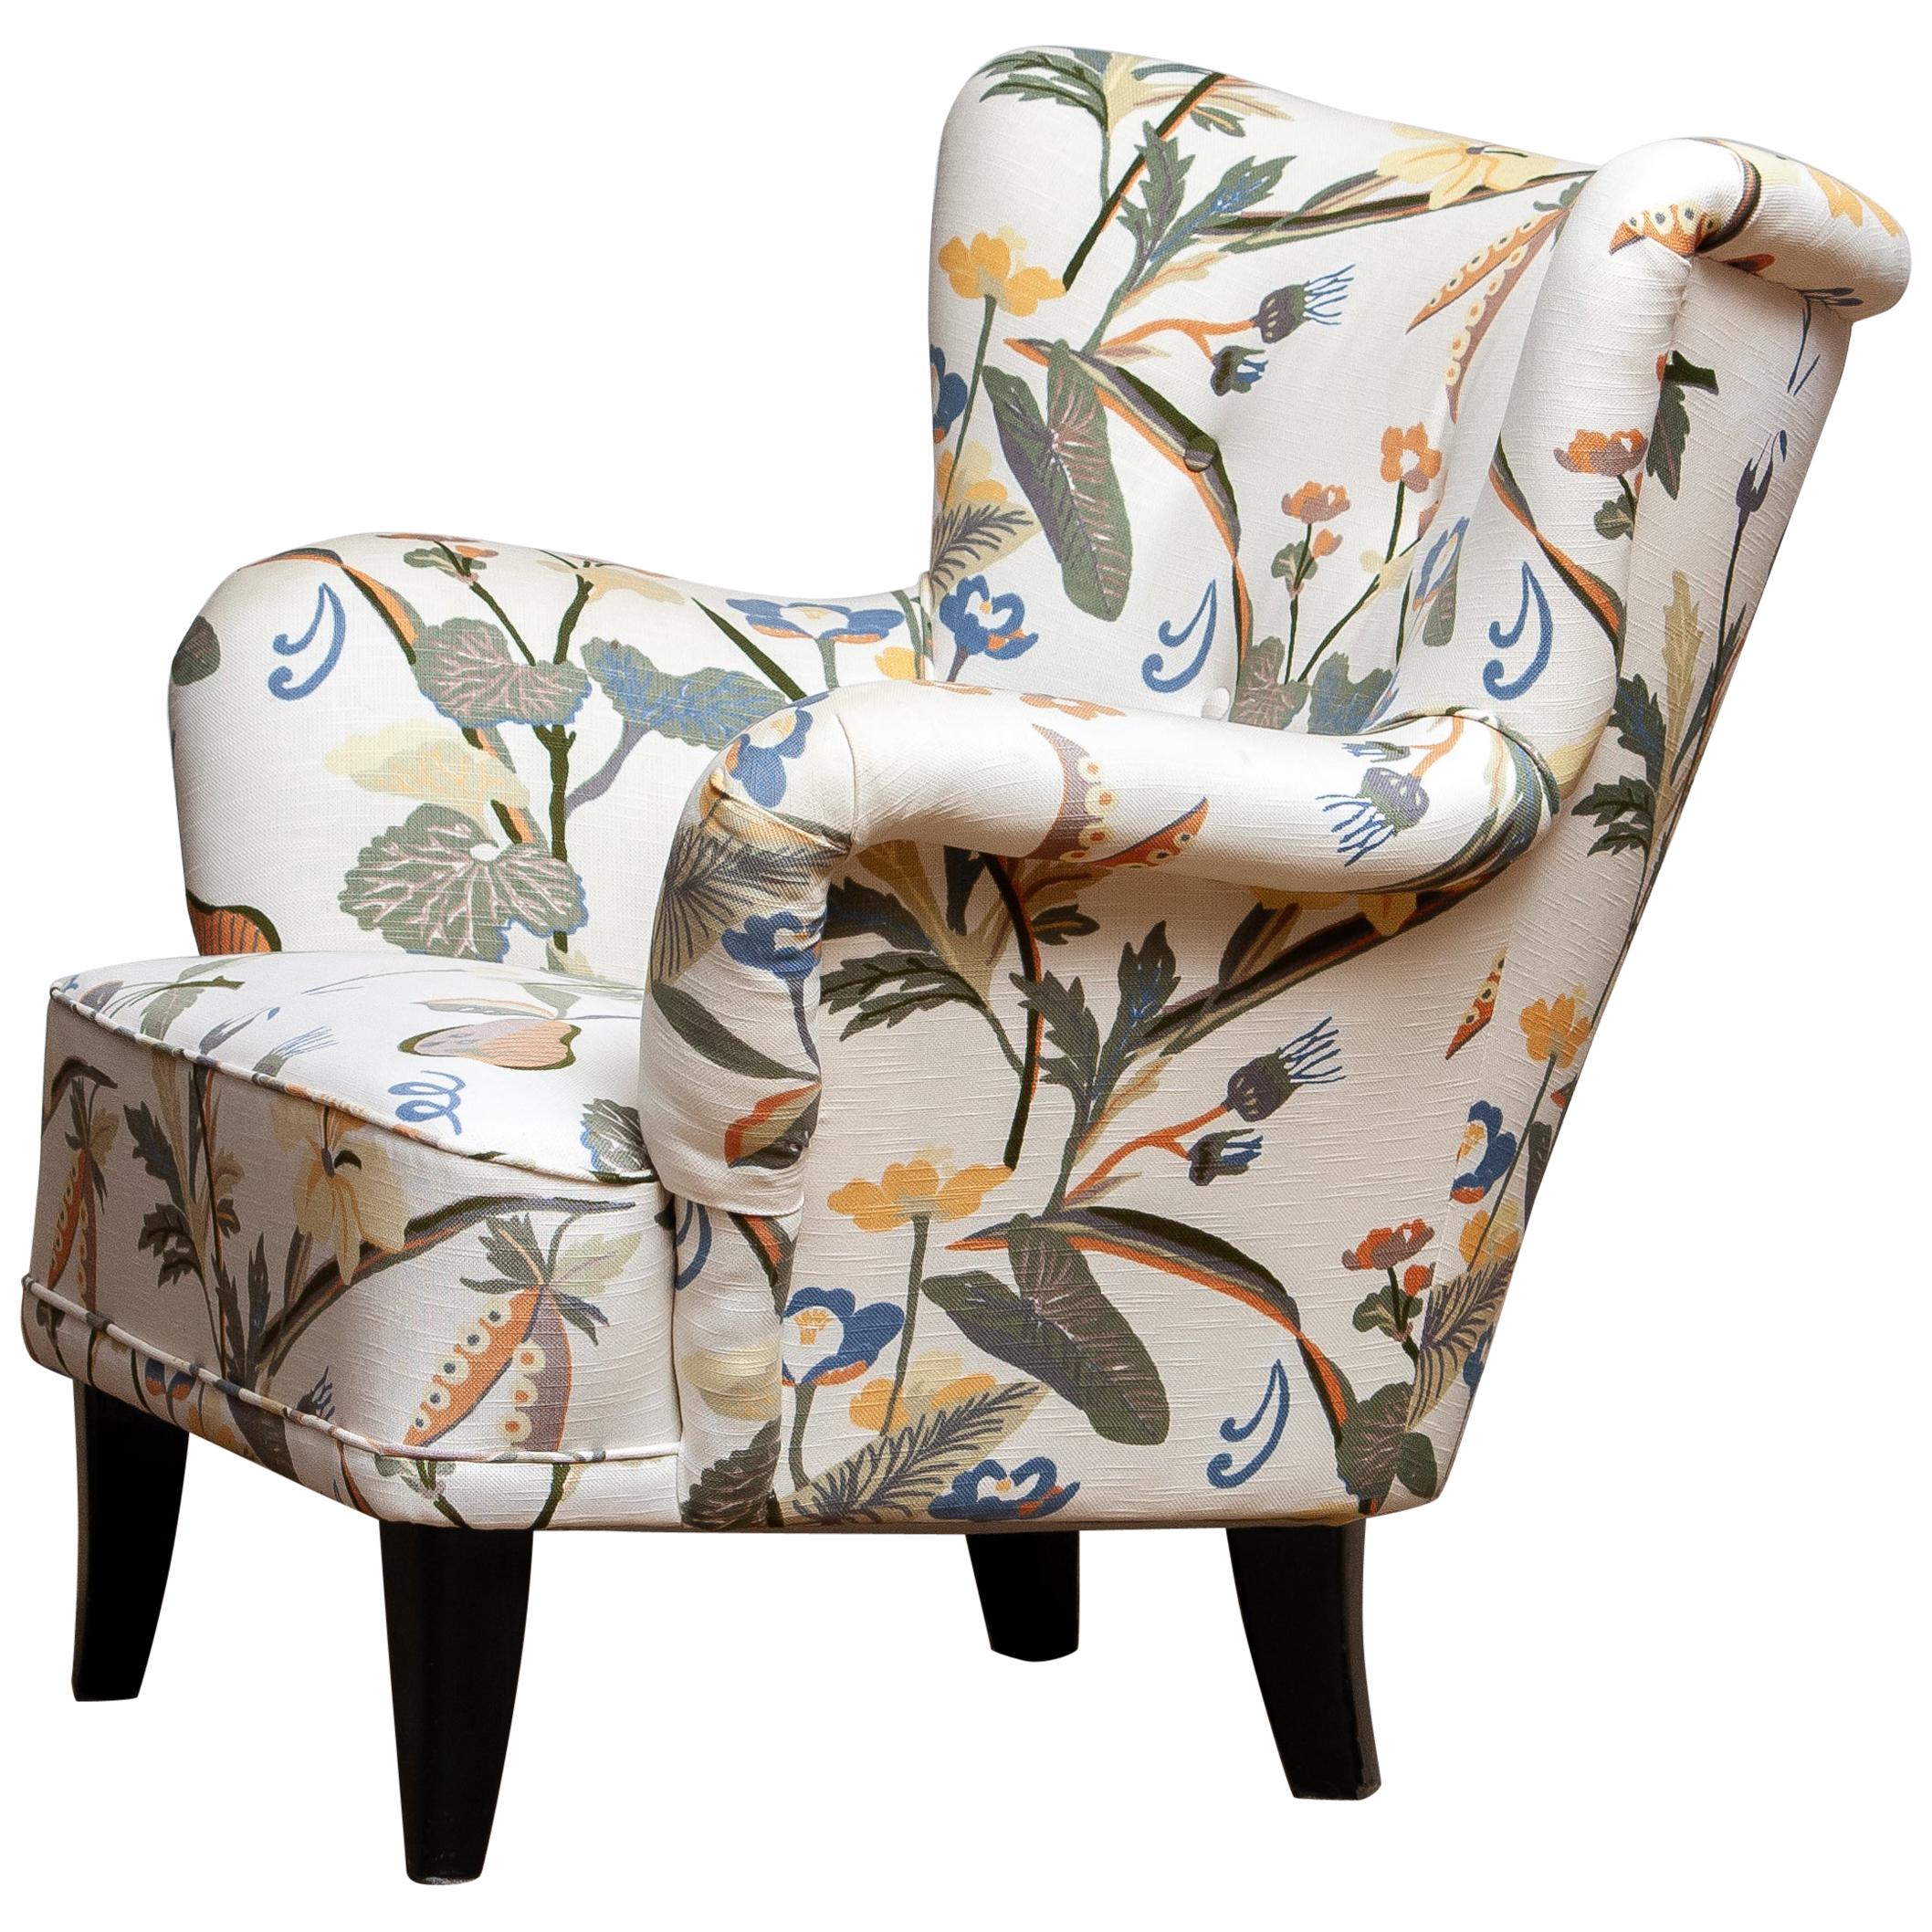 Extremely beautiful 1940s-1950s Arm / lounge / club chair upholstered (in a later period) with the typical floral print fabric designed by Josef Frank.
This chair is designed by Ilmari Lappalainen for Asko Finland. 